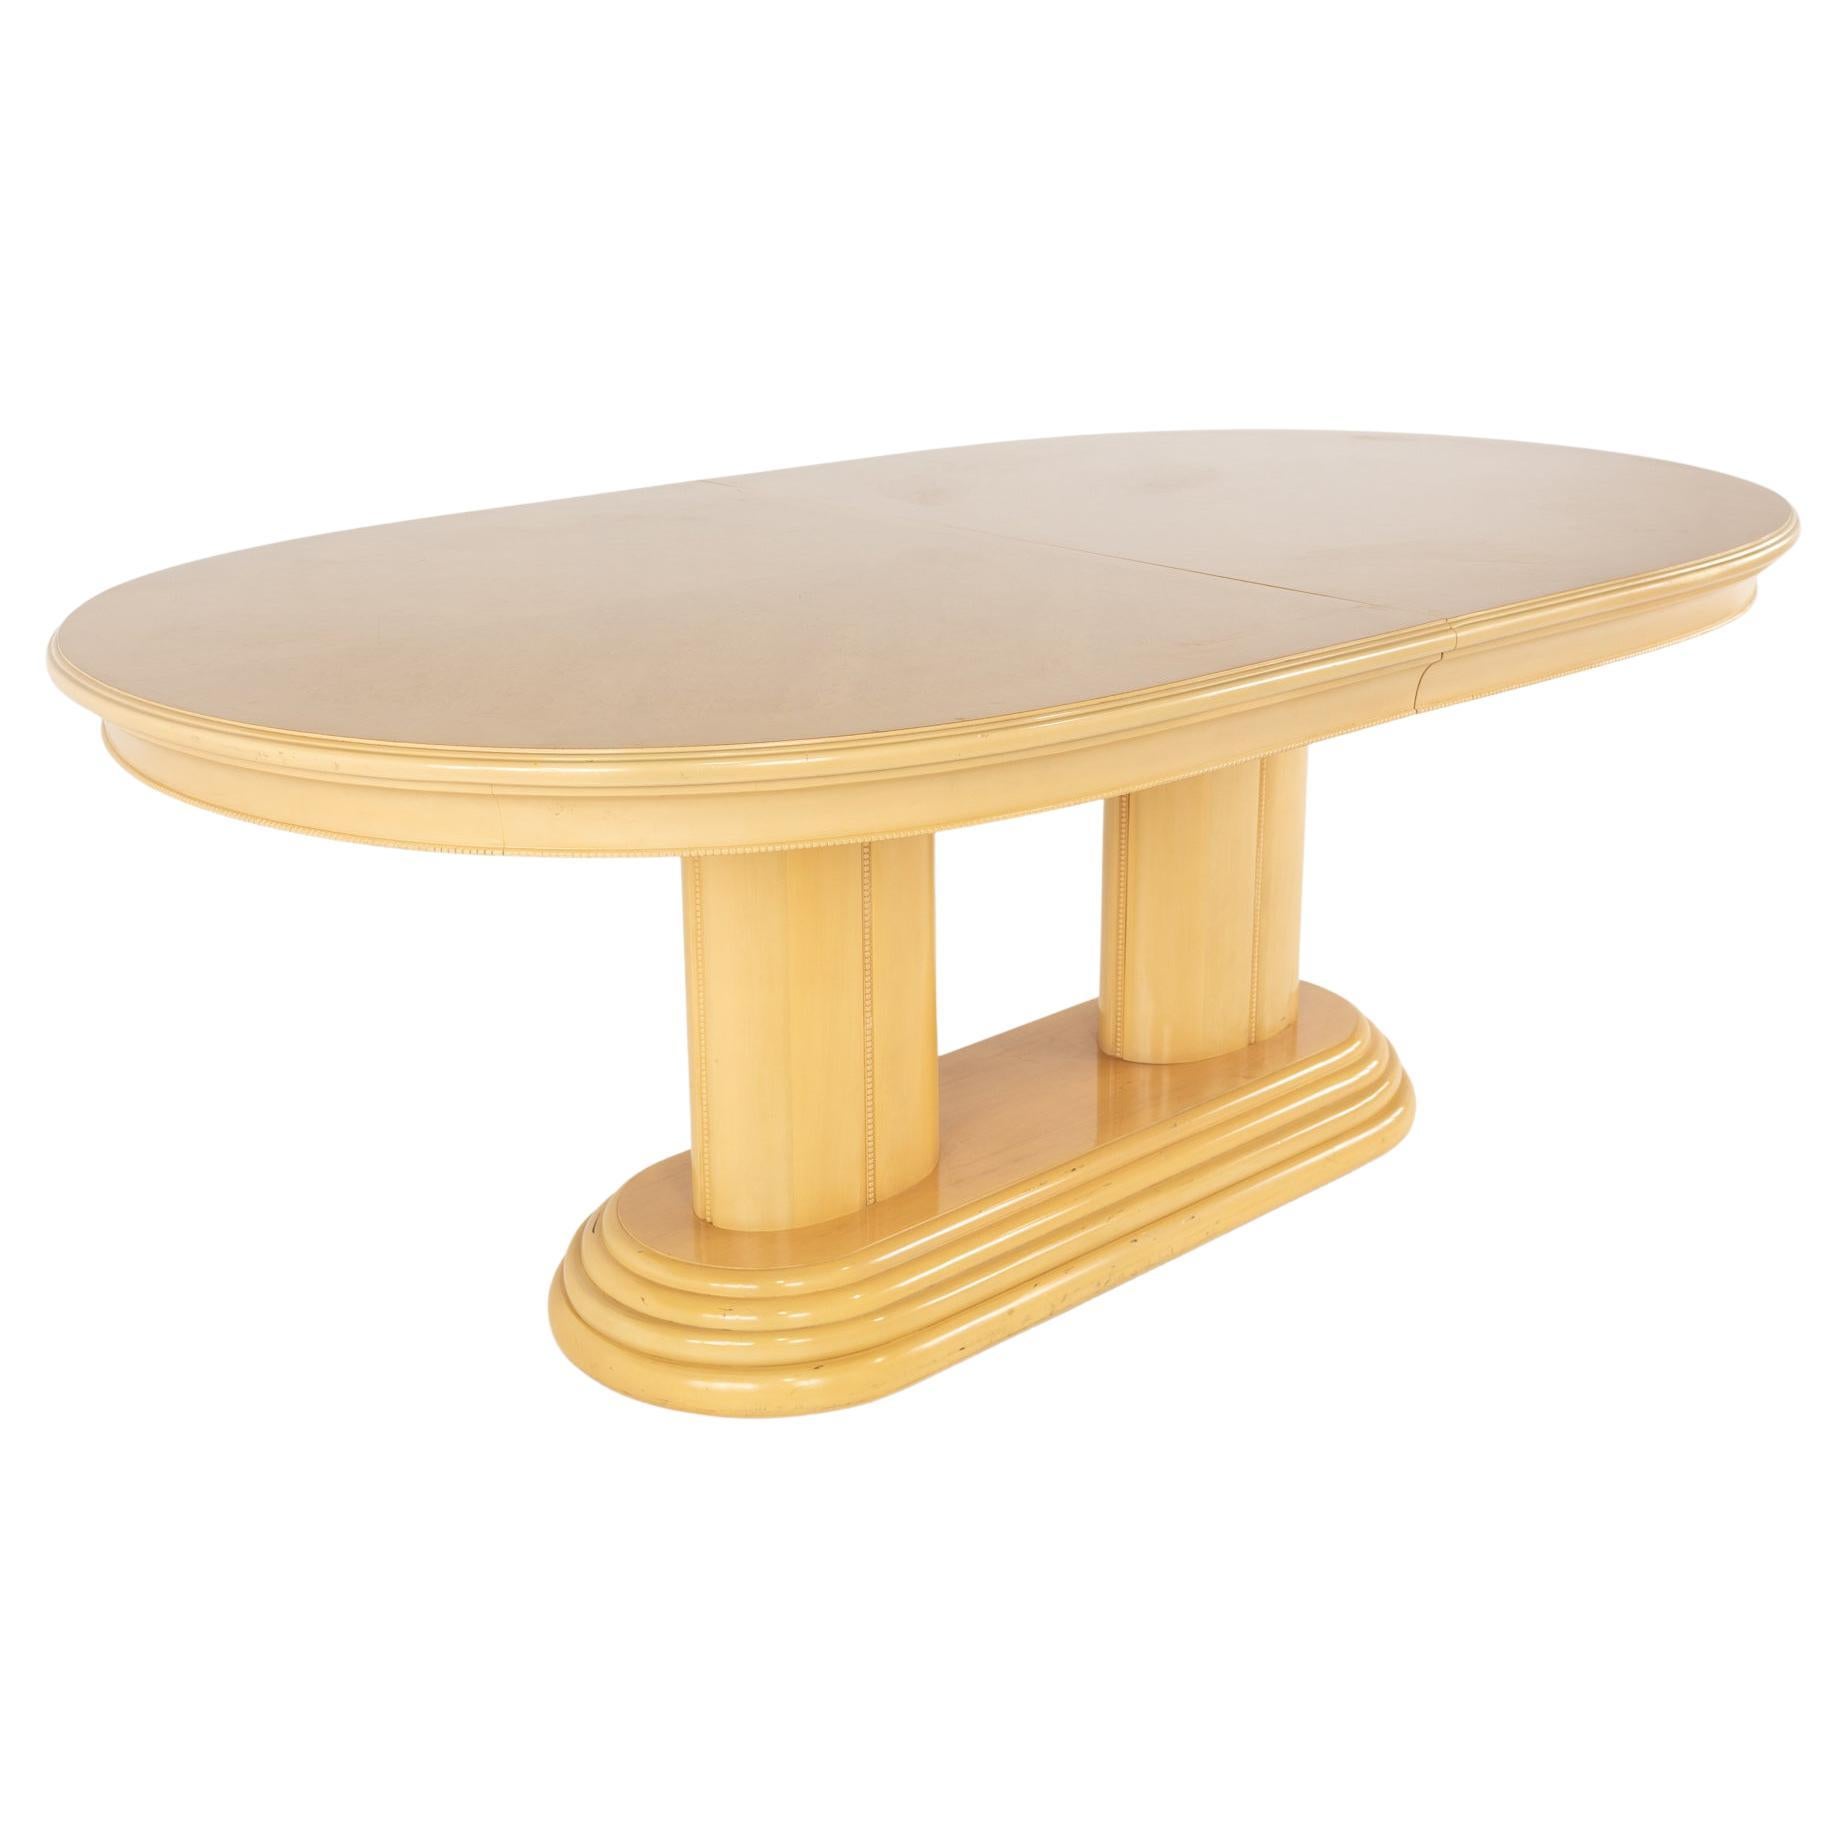 Henredon Style Cream Pedestal Dining Table with 2 Leaves